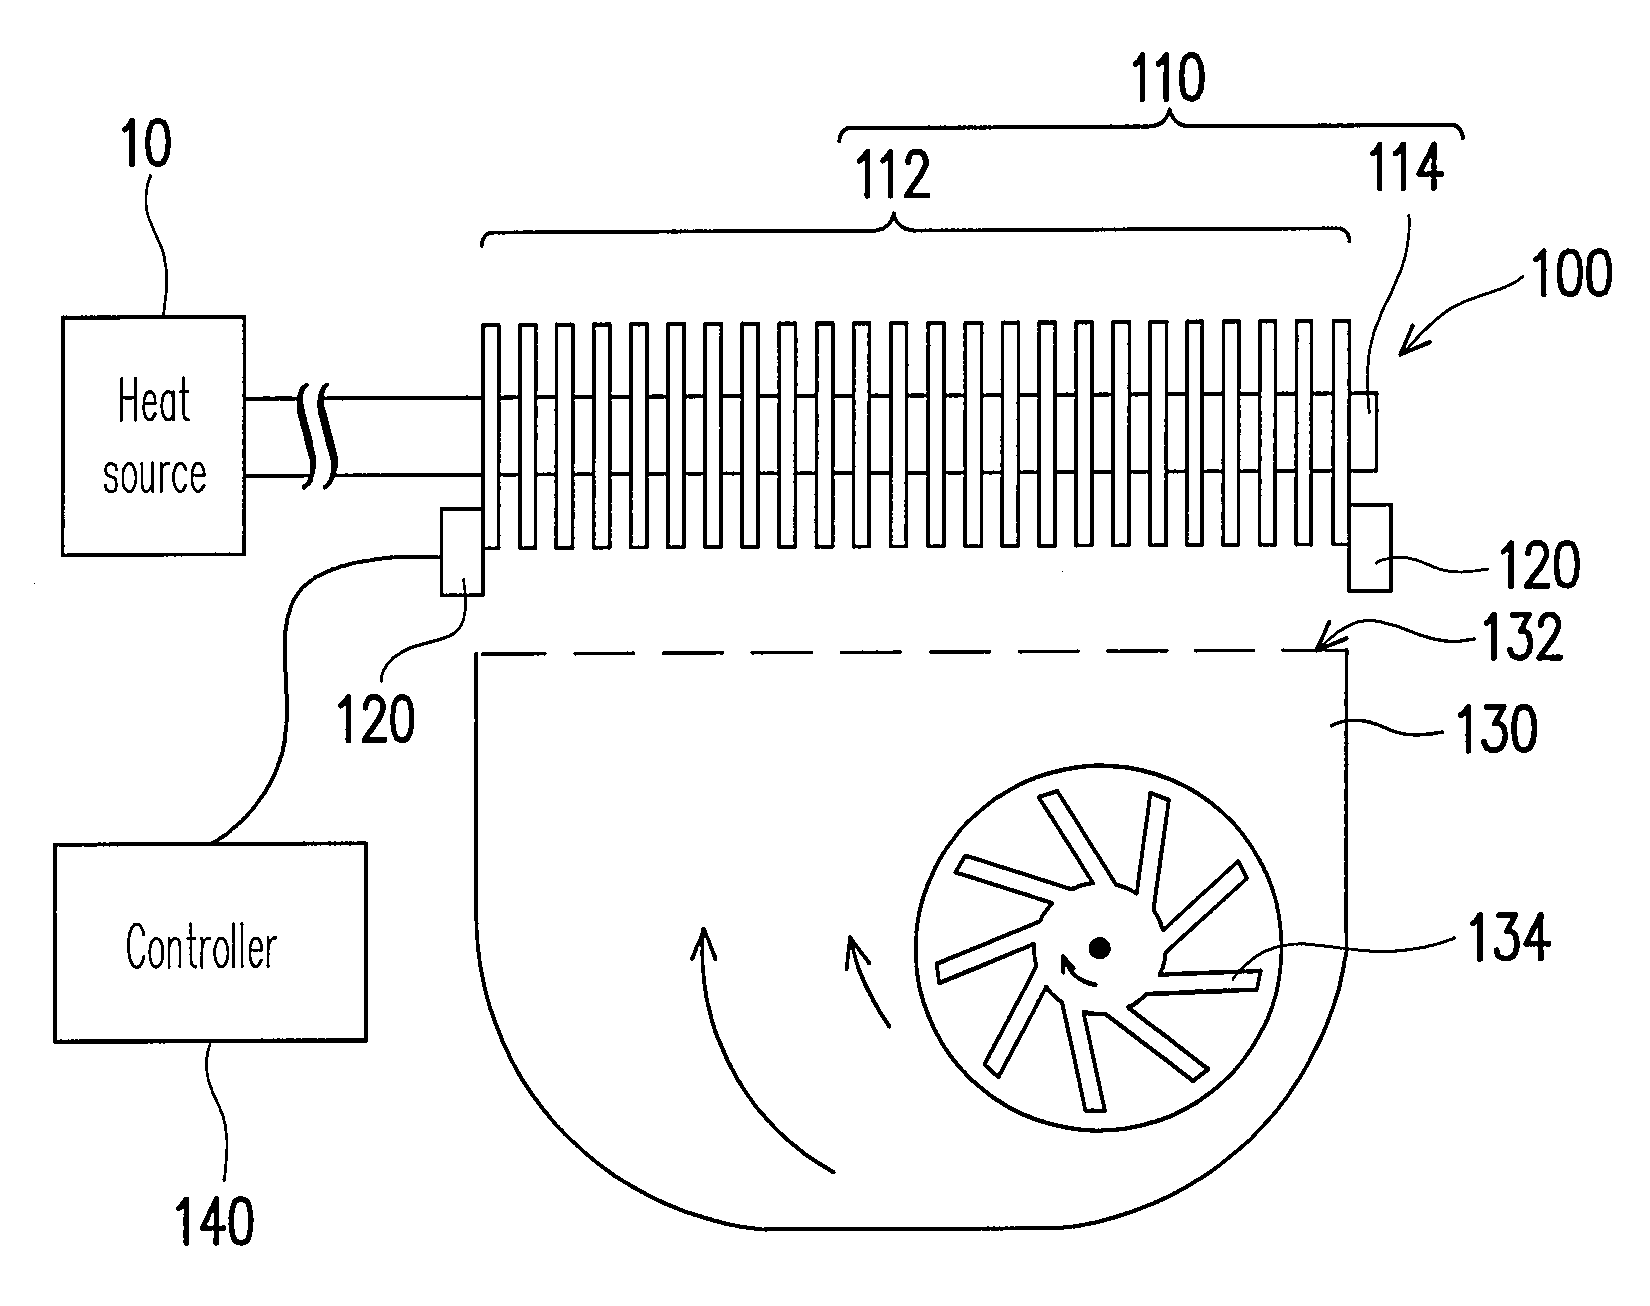 Heat-dissipation device with dust-disposal function